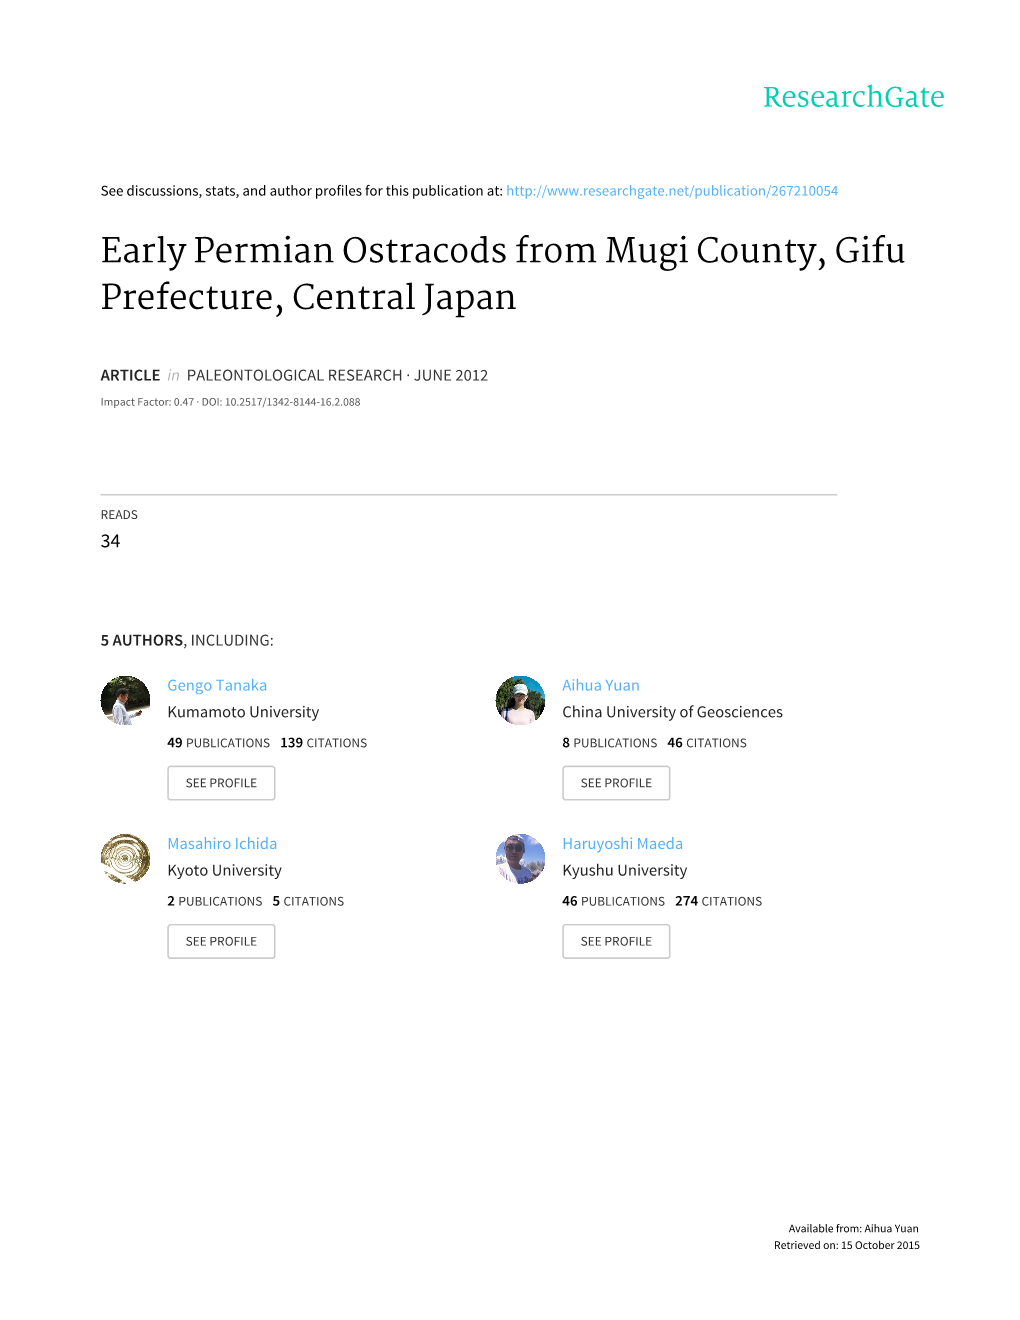 Early Permian Ostracods from Mugi County, Gifu Prefecture, Central Japan